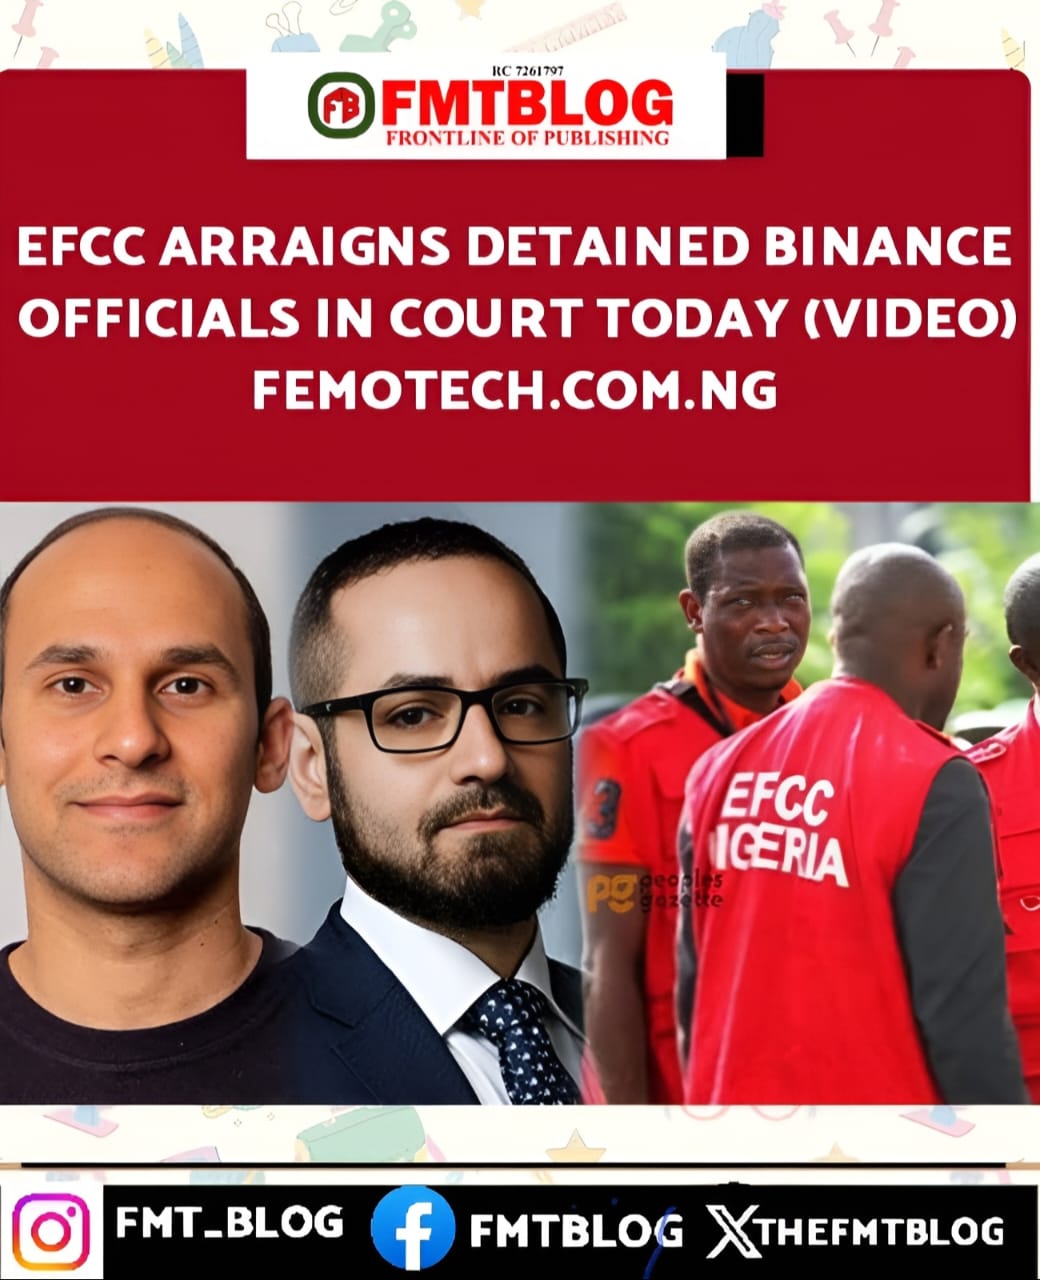 EFCC Arraigns Detained Binance Officials In Court Today (VIDEO)